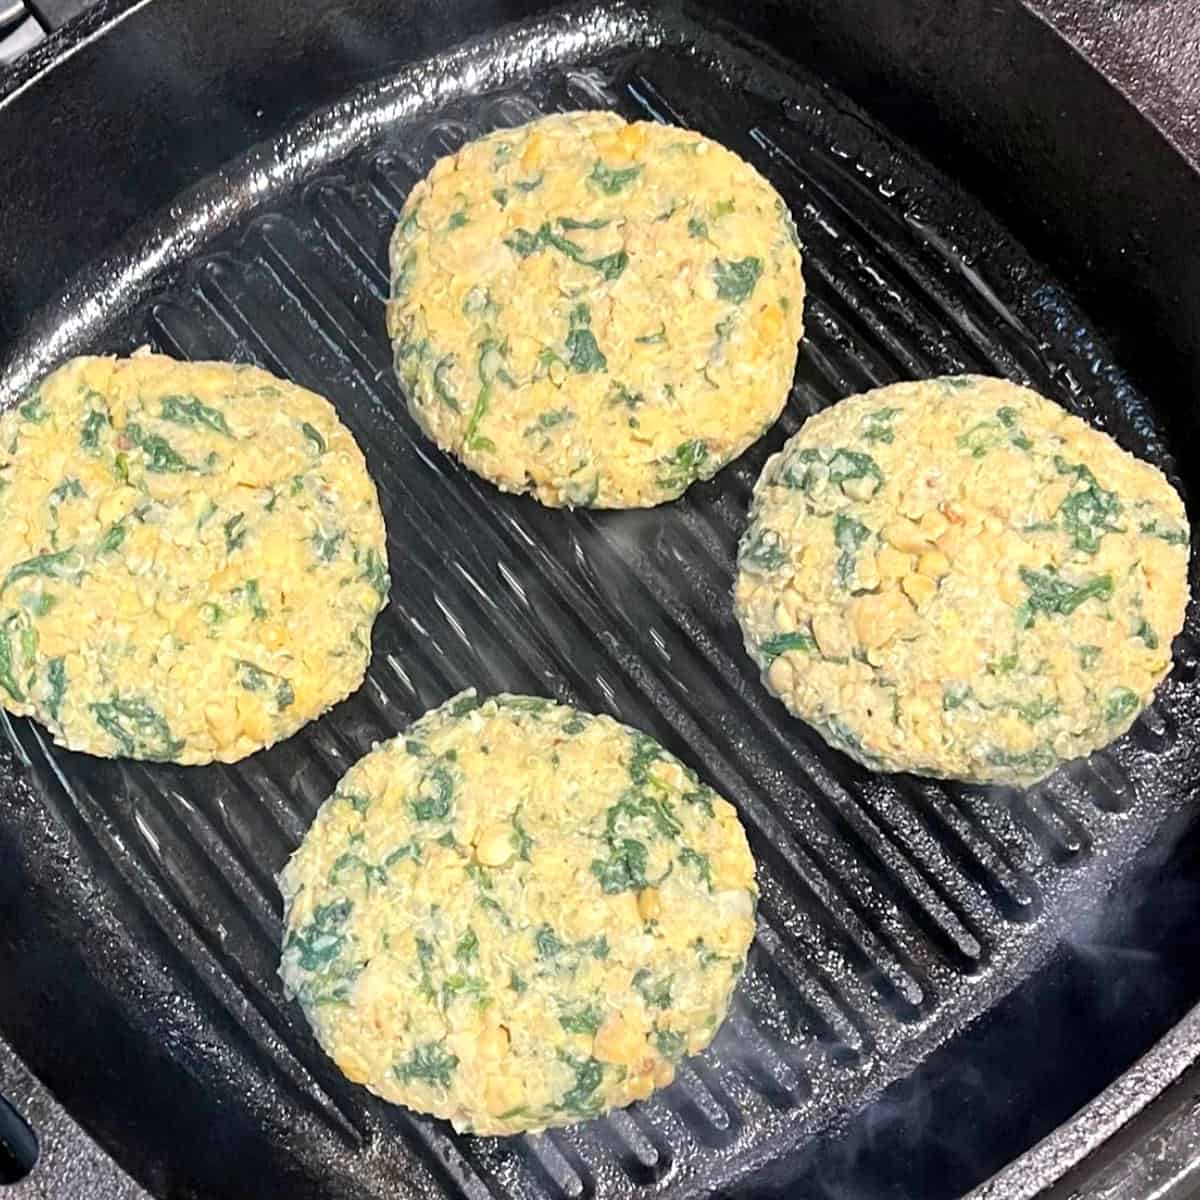 Chickpea quinoa burger patties in a grill pan.